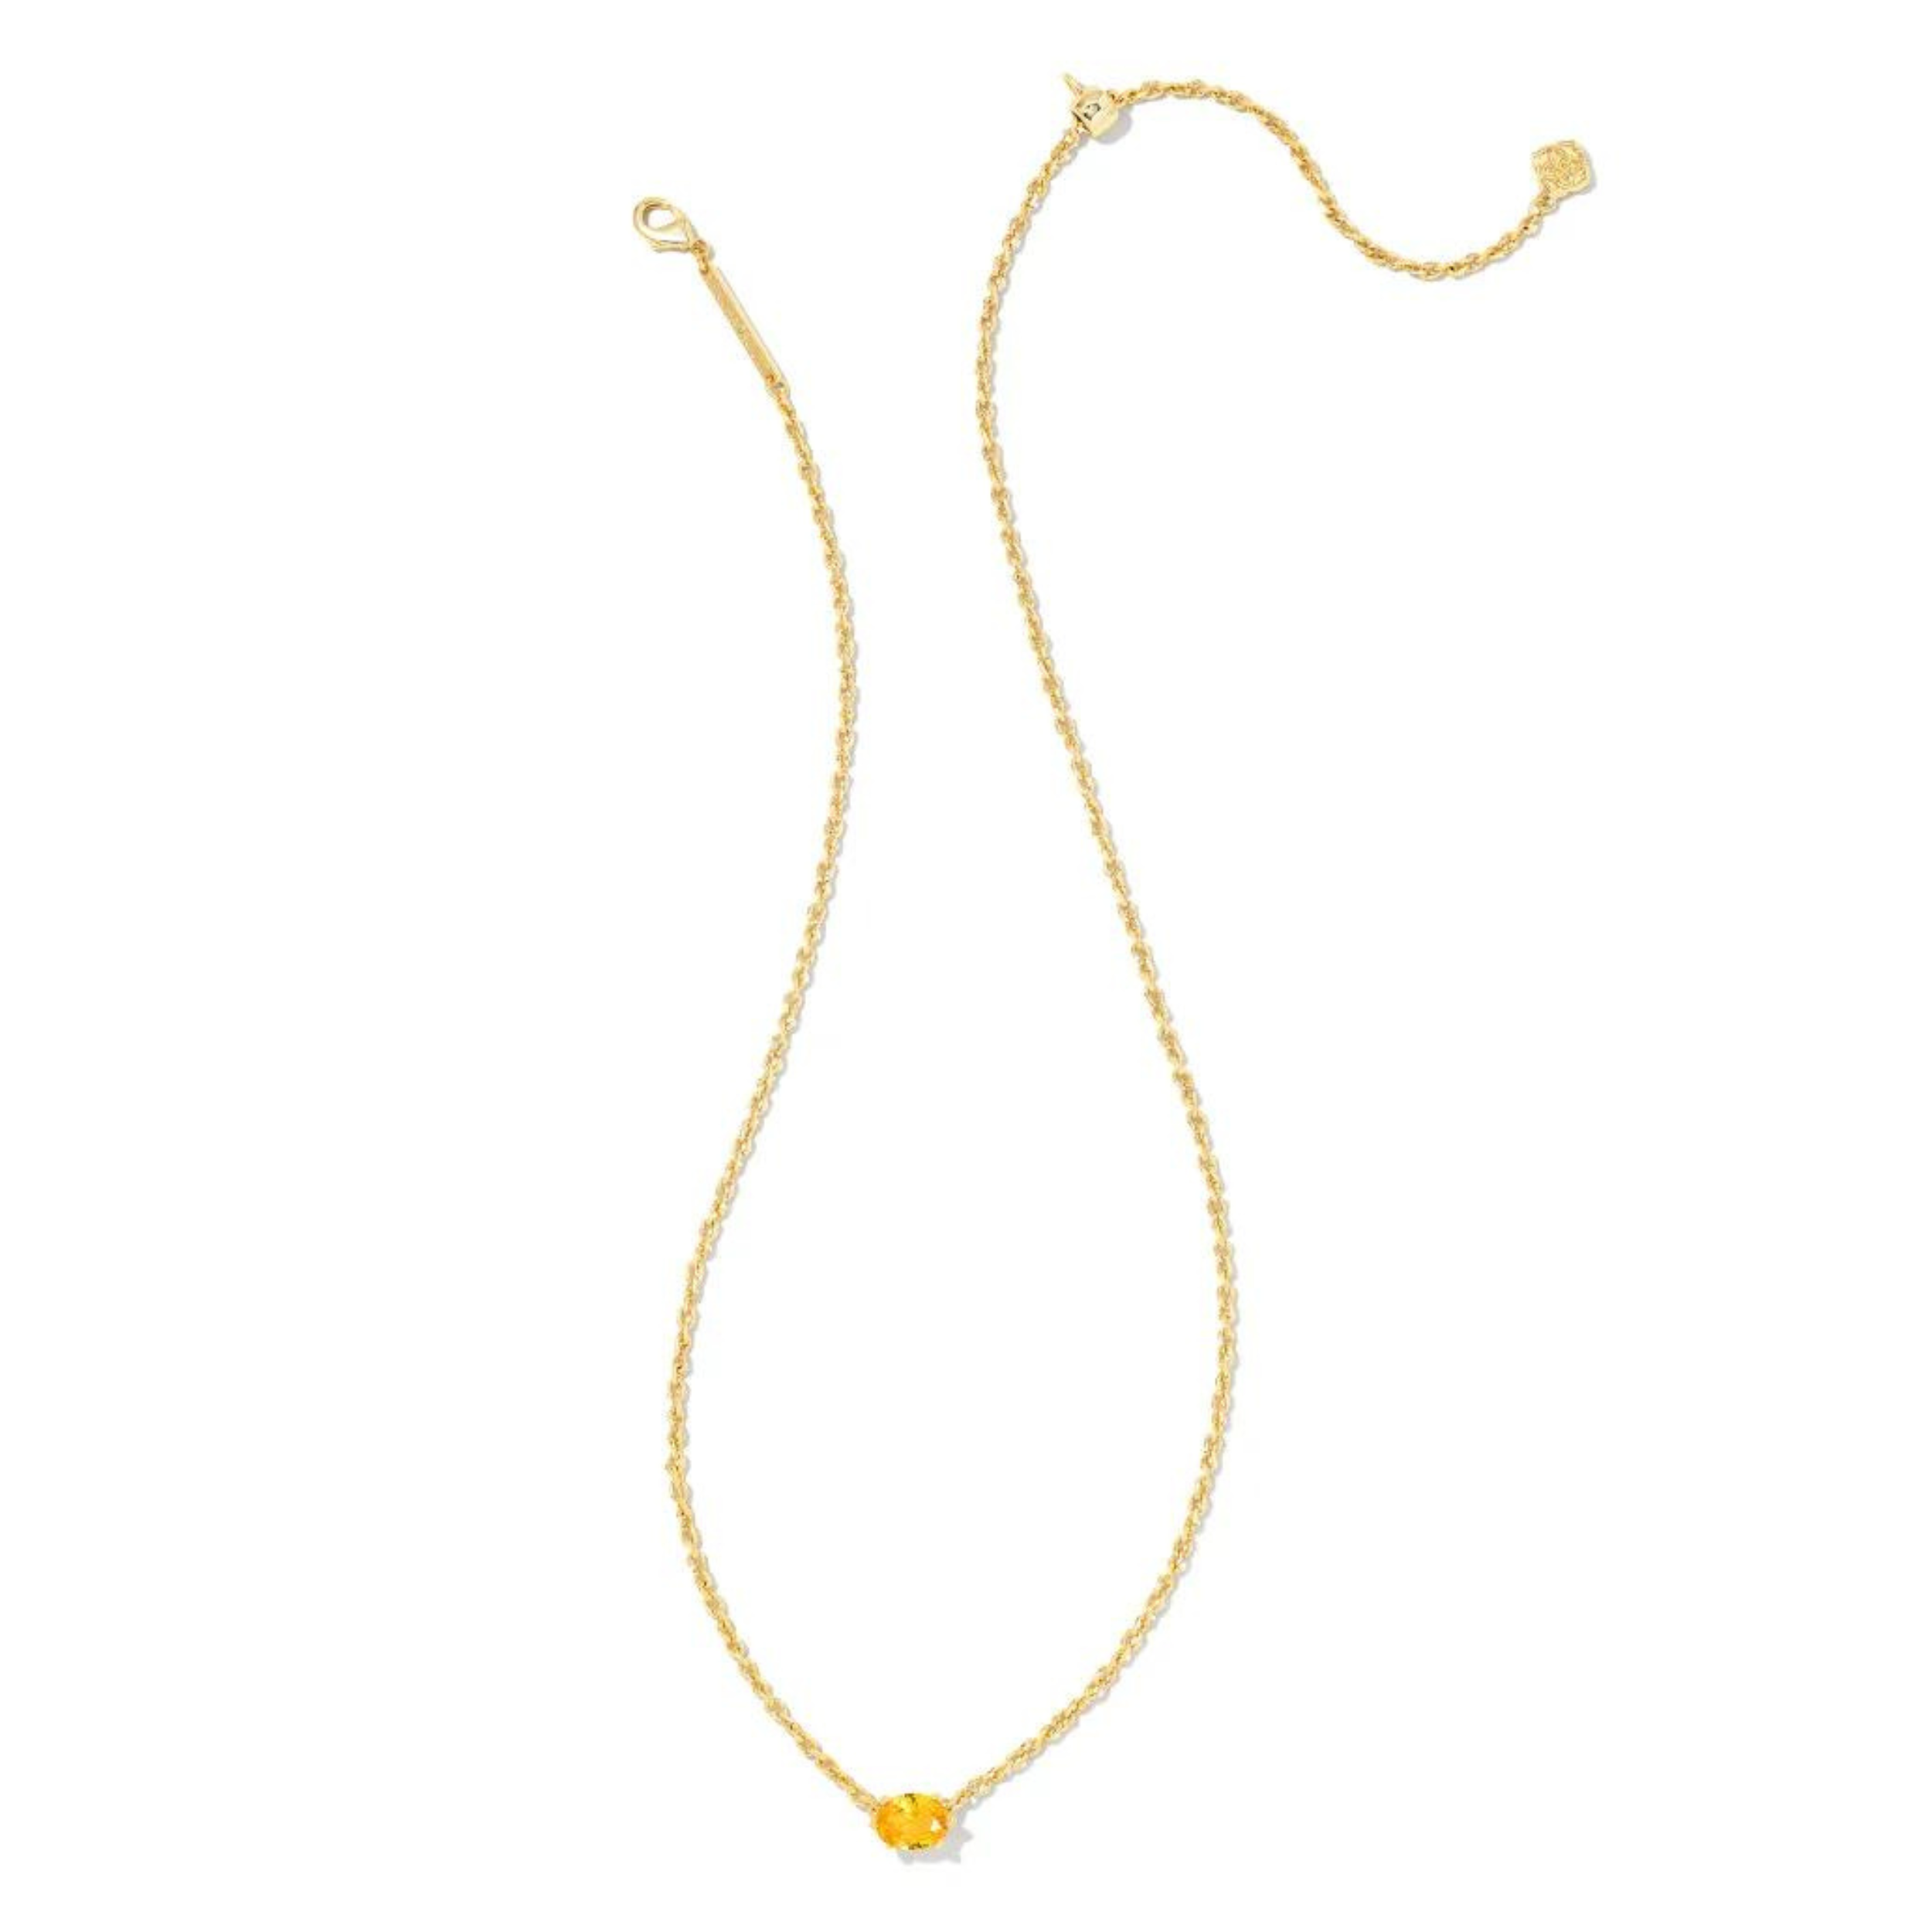 Kendra Scott | Cailin Gold Pendant Necklace in Golden Yellow Crystal - Giddy Up Glamour Boutique